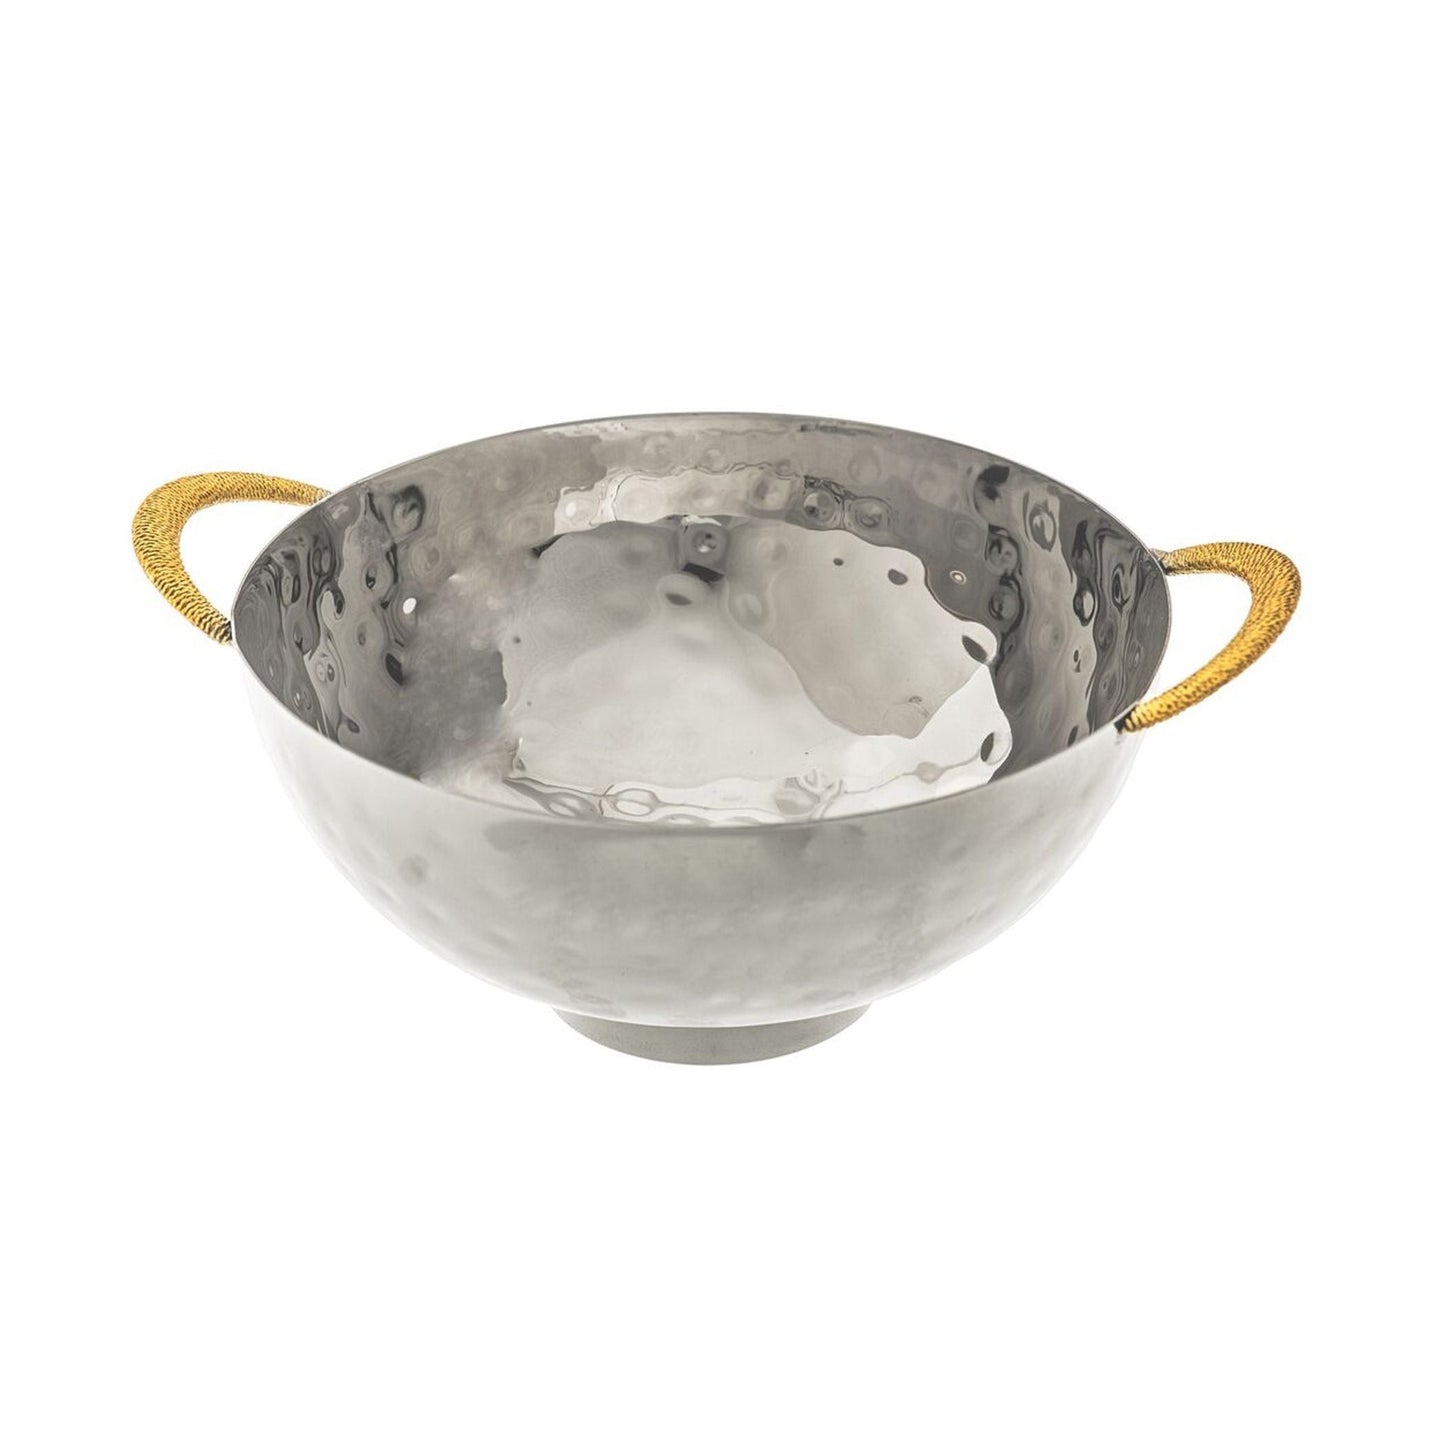 Classic Touch Decor Bowl With Gold Handles, 12.5"